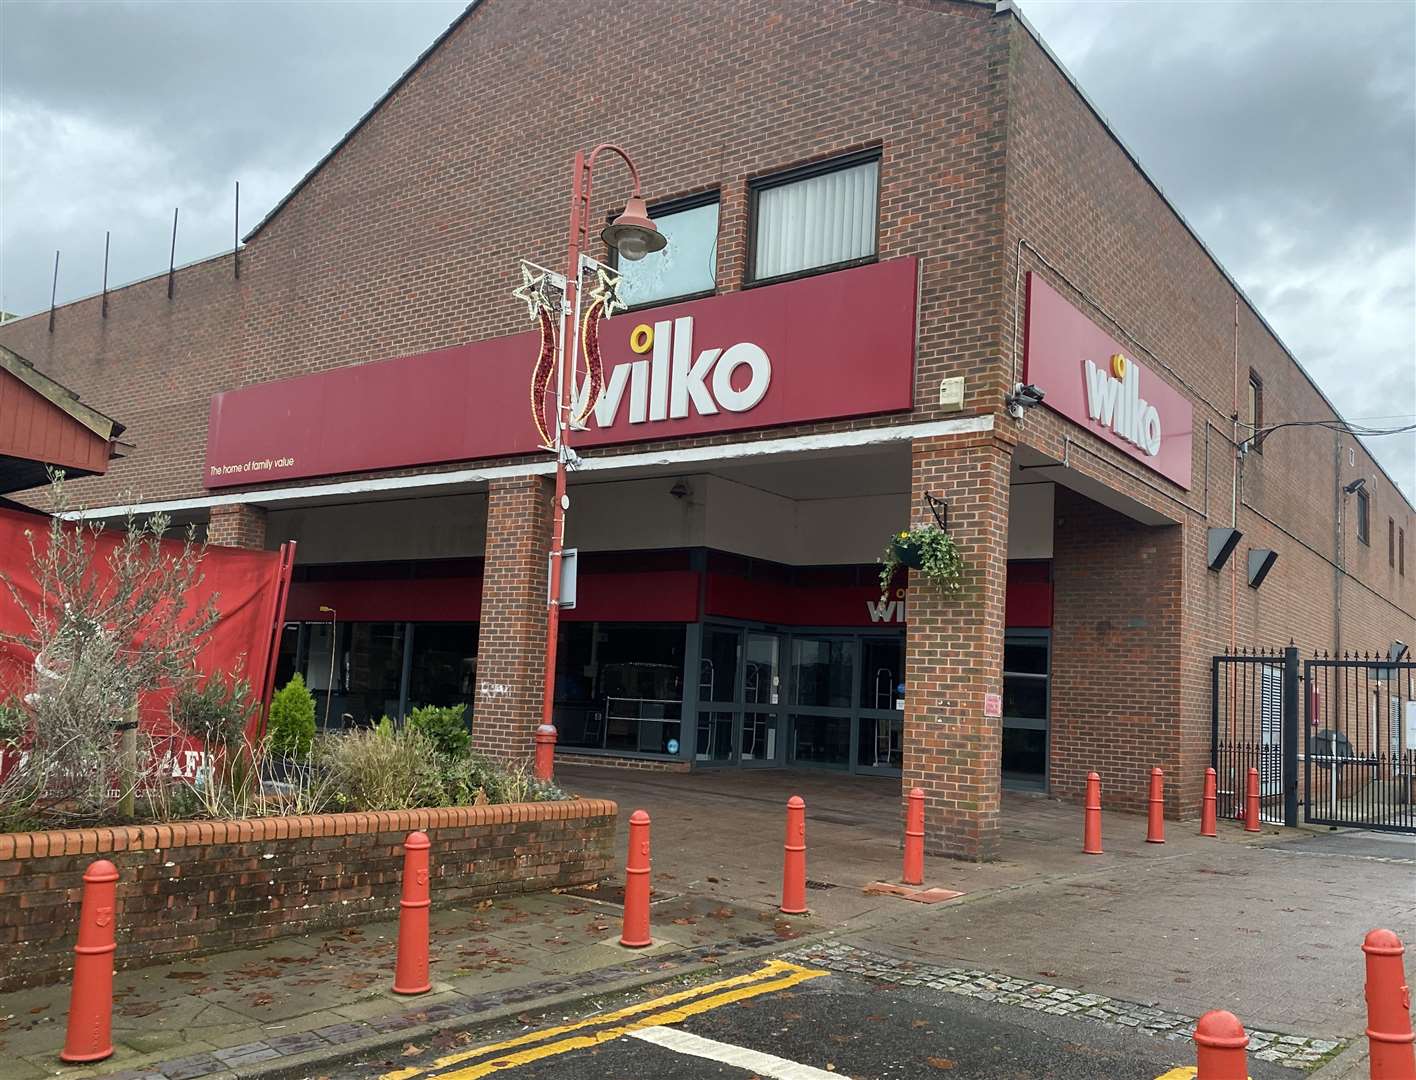 B&M will take over the former Wilko